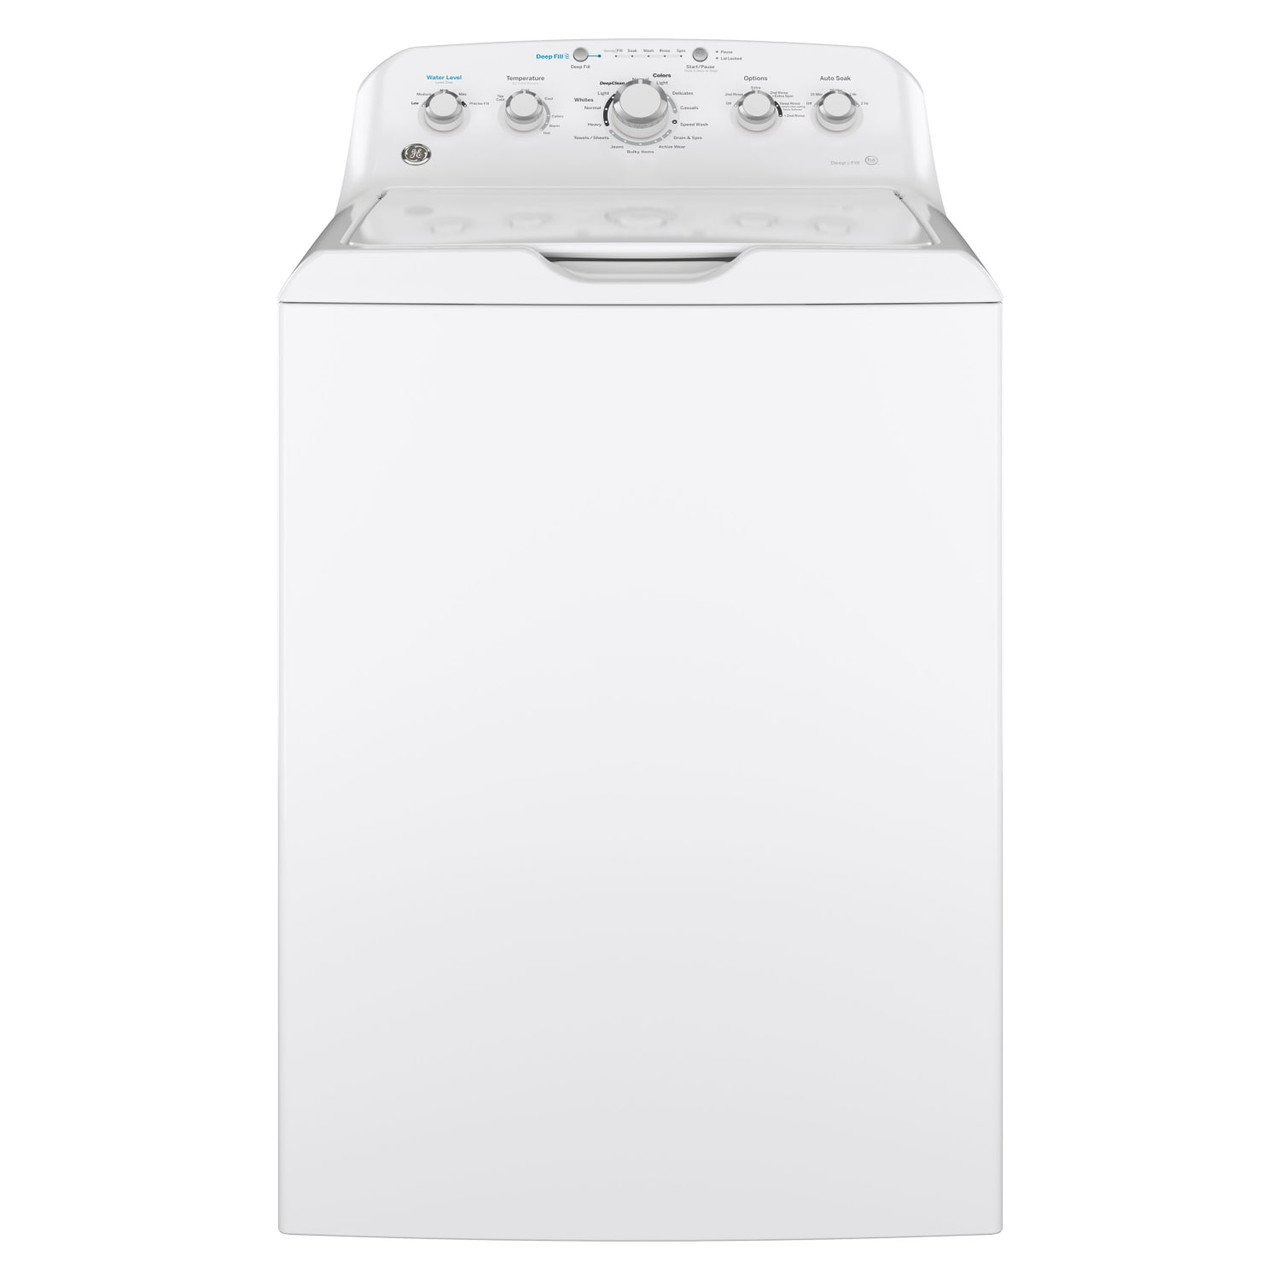 GE® 4.5 cu. ft. Capacity Washer with Stainless Steel Basket - GTW465ASNWW